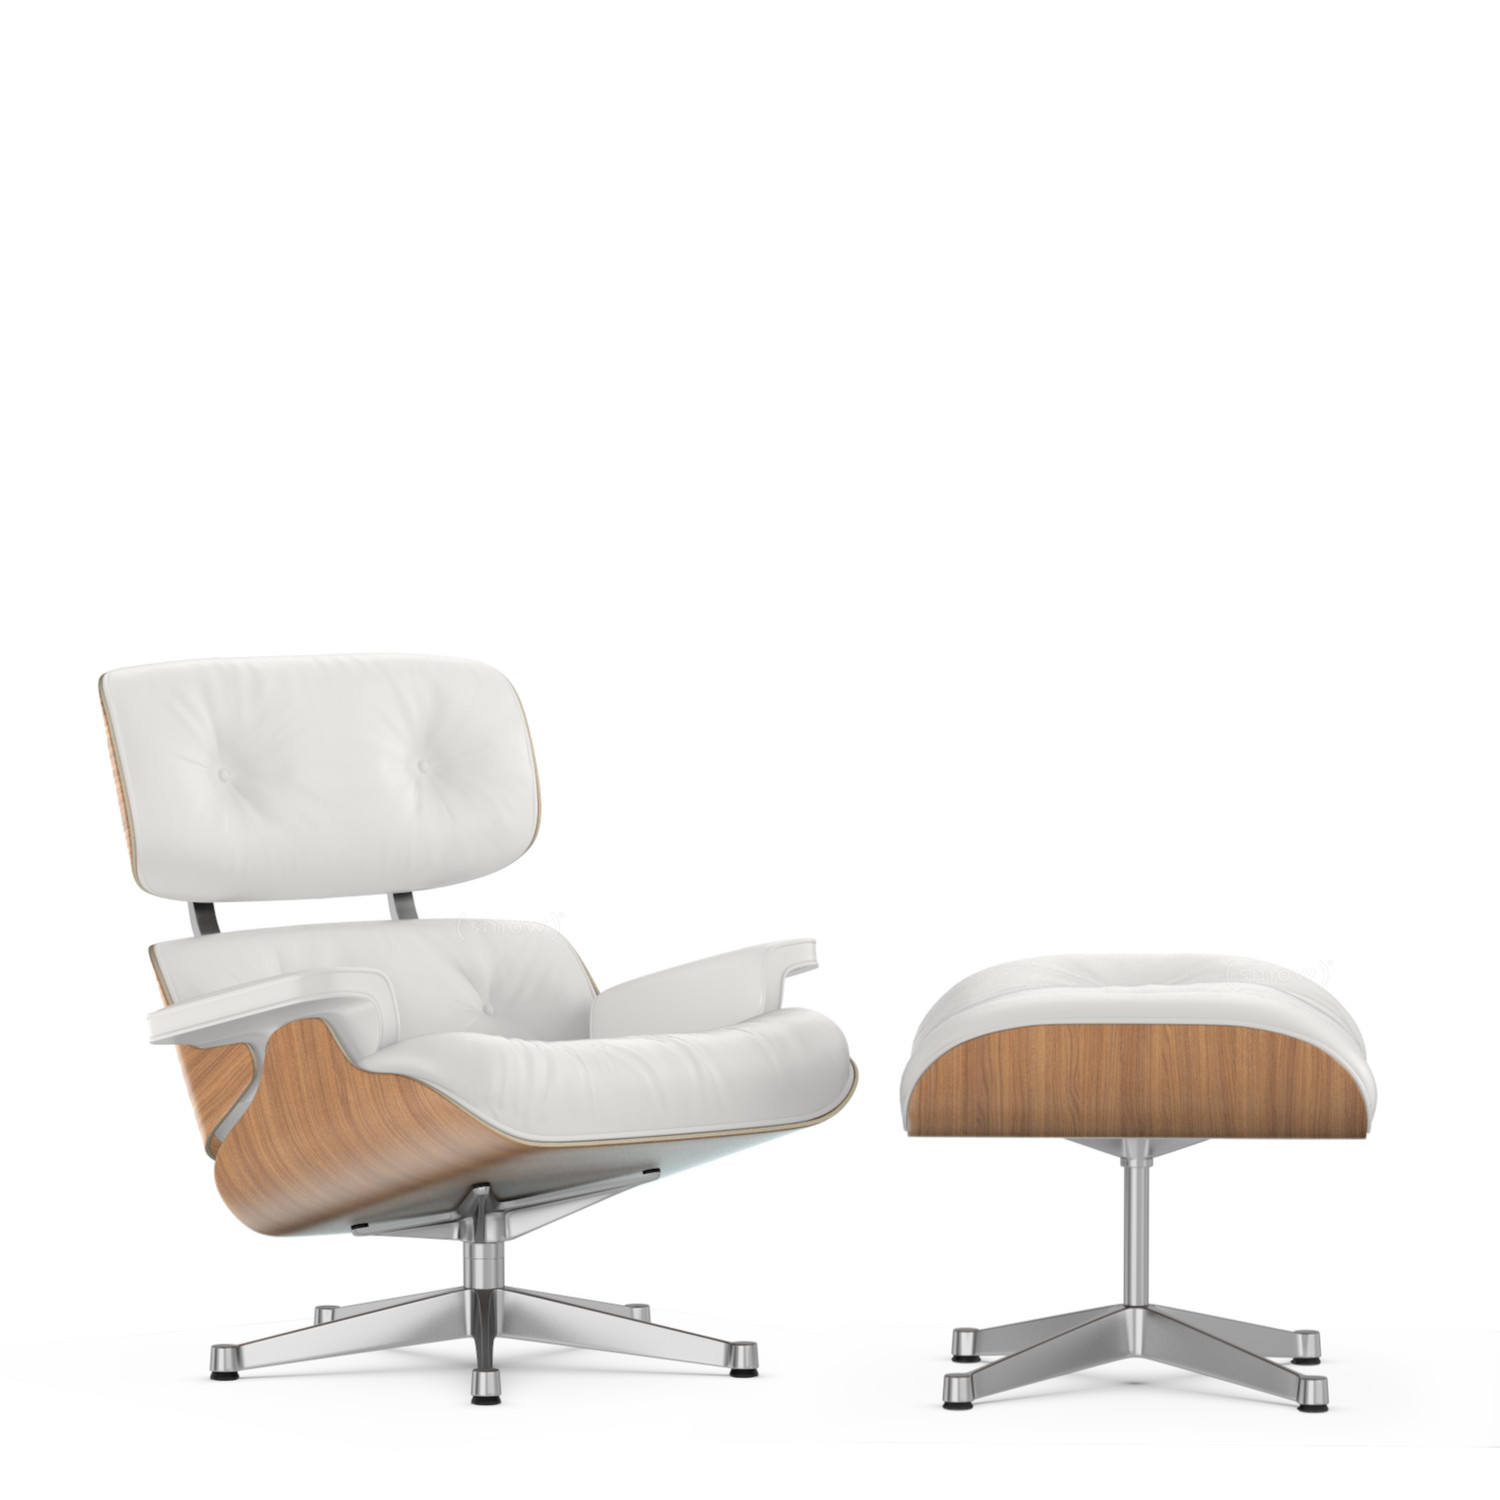 ik ben slaperig credit spoel Vitra Lounge Chair & Ottoman, Walnut with white pigmentation, Leather  Premium F snow, 89 cm, Aluminium polished by Charles & Ray Eames, 1956 -  Designer furniture by smow.com